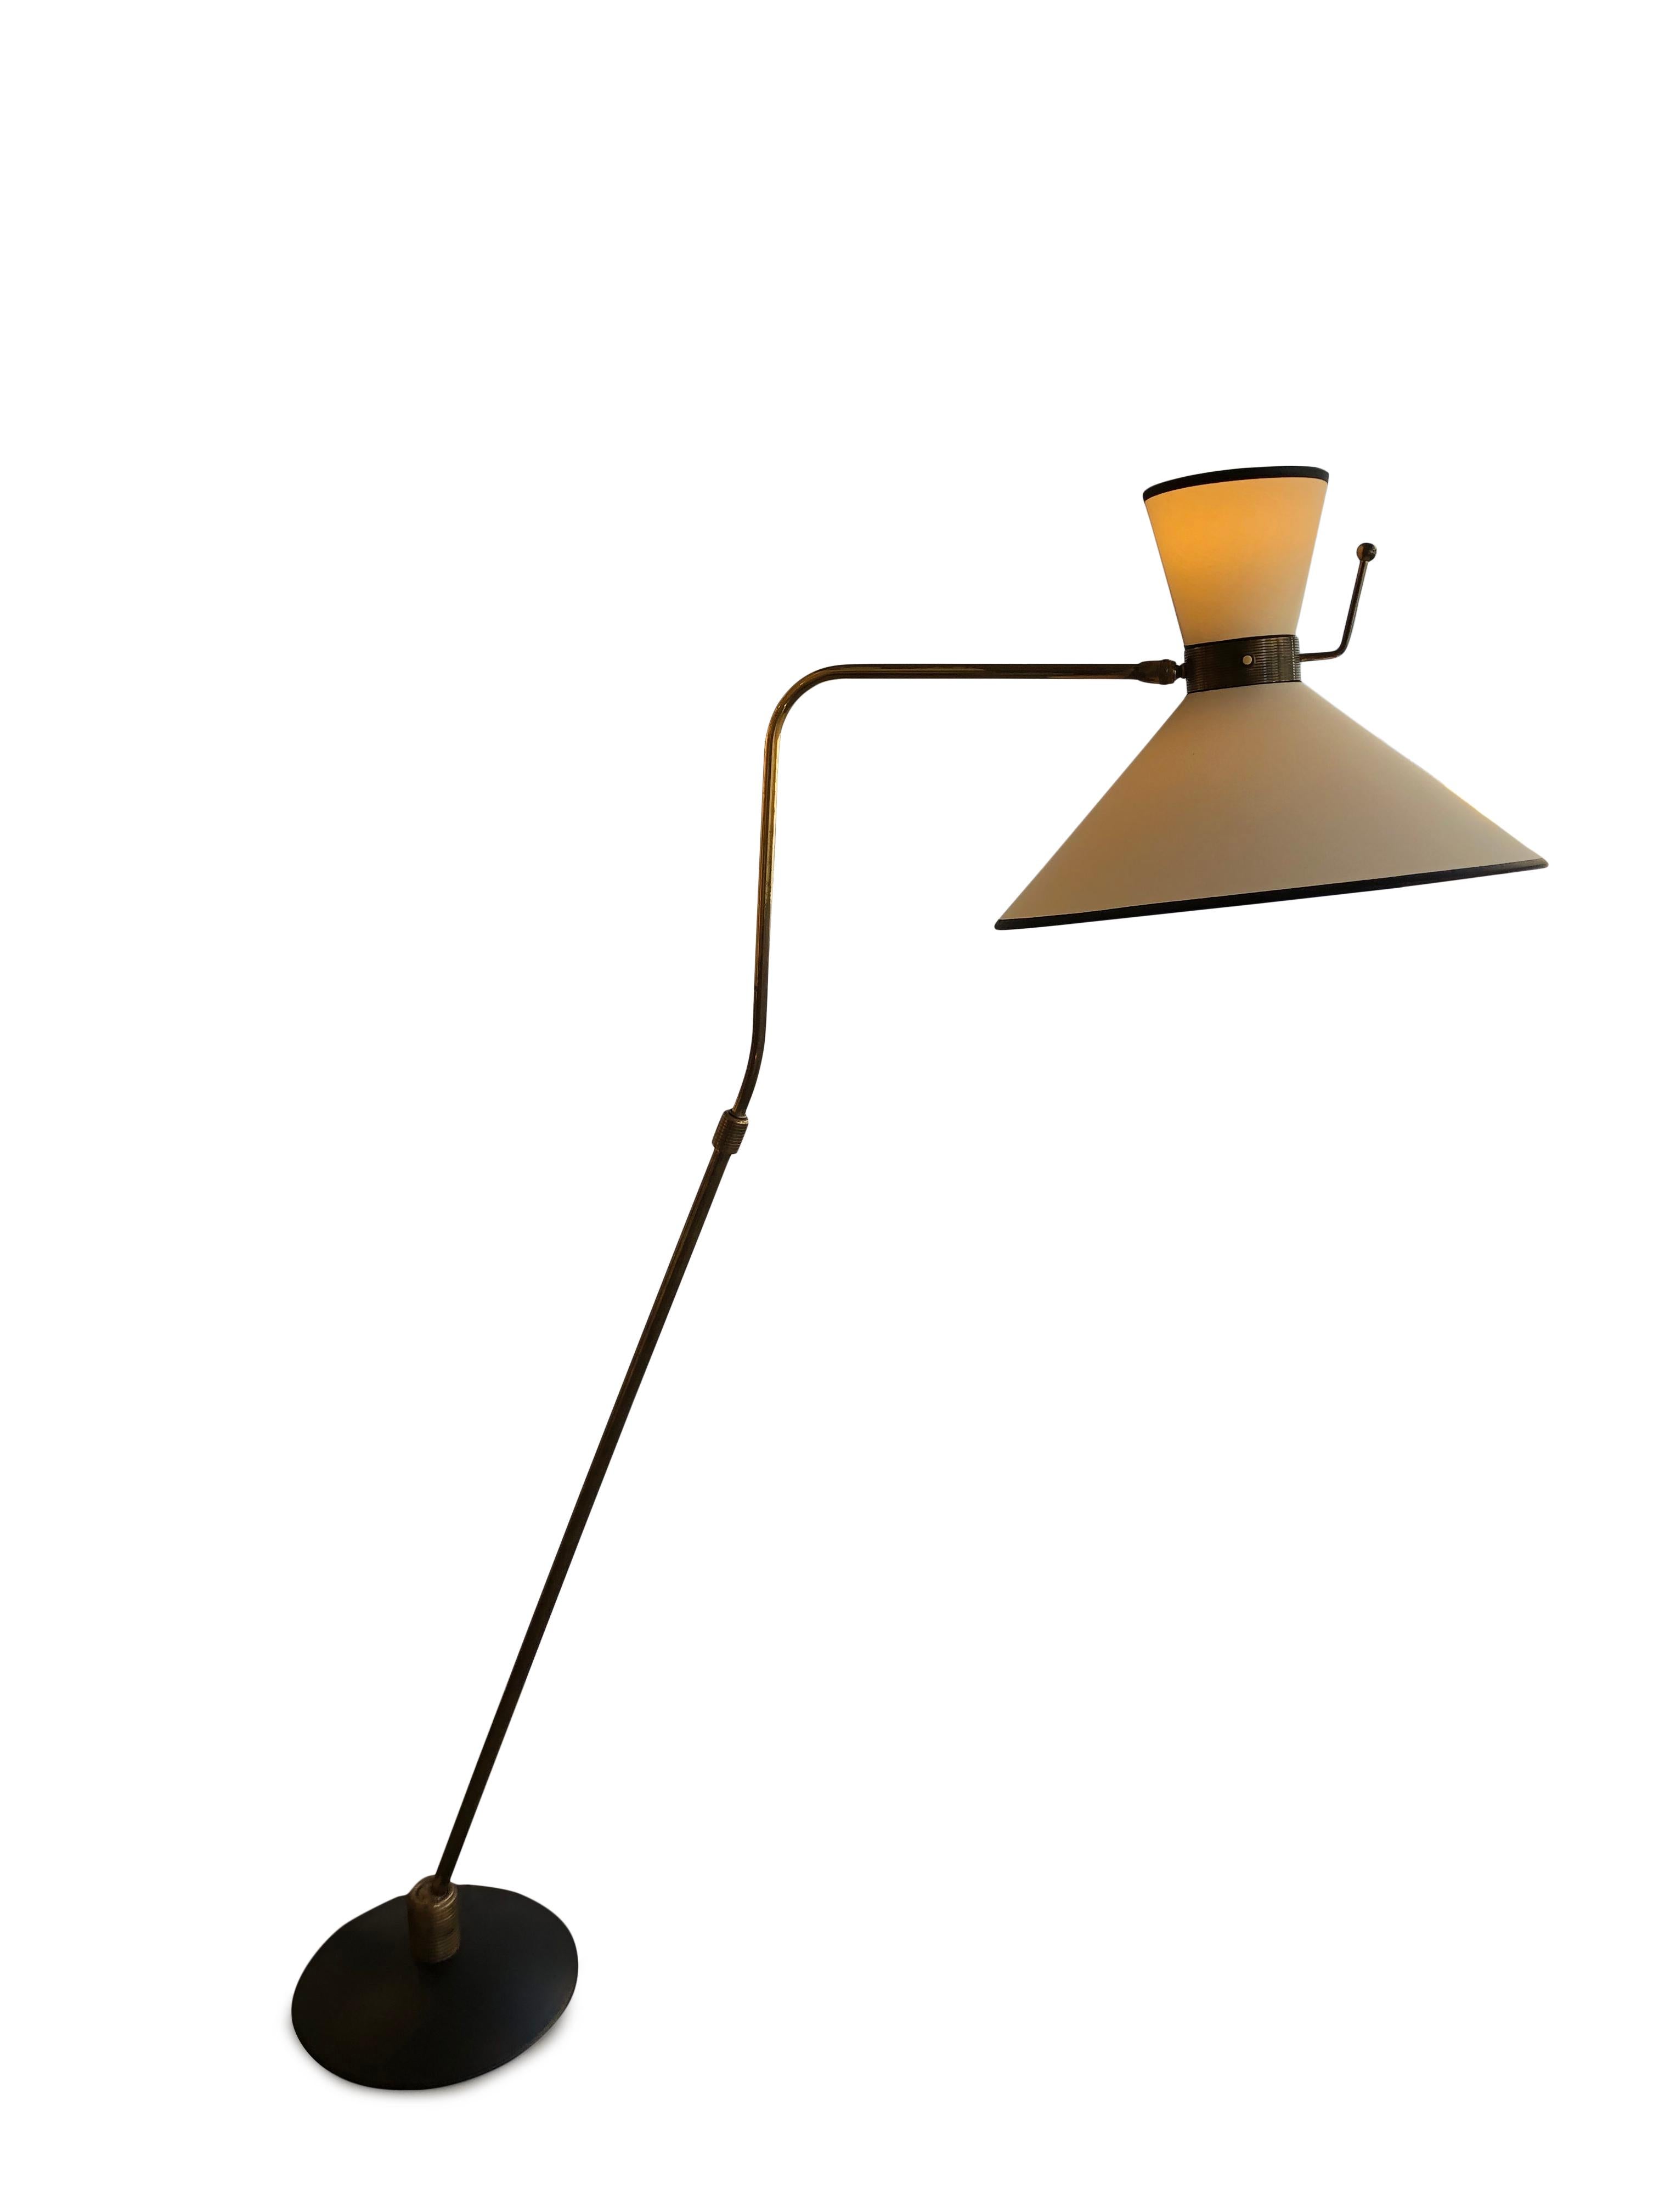 Floor lamp by Maison Arlus
black lacquered metal, bronze and brass
from 1950.